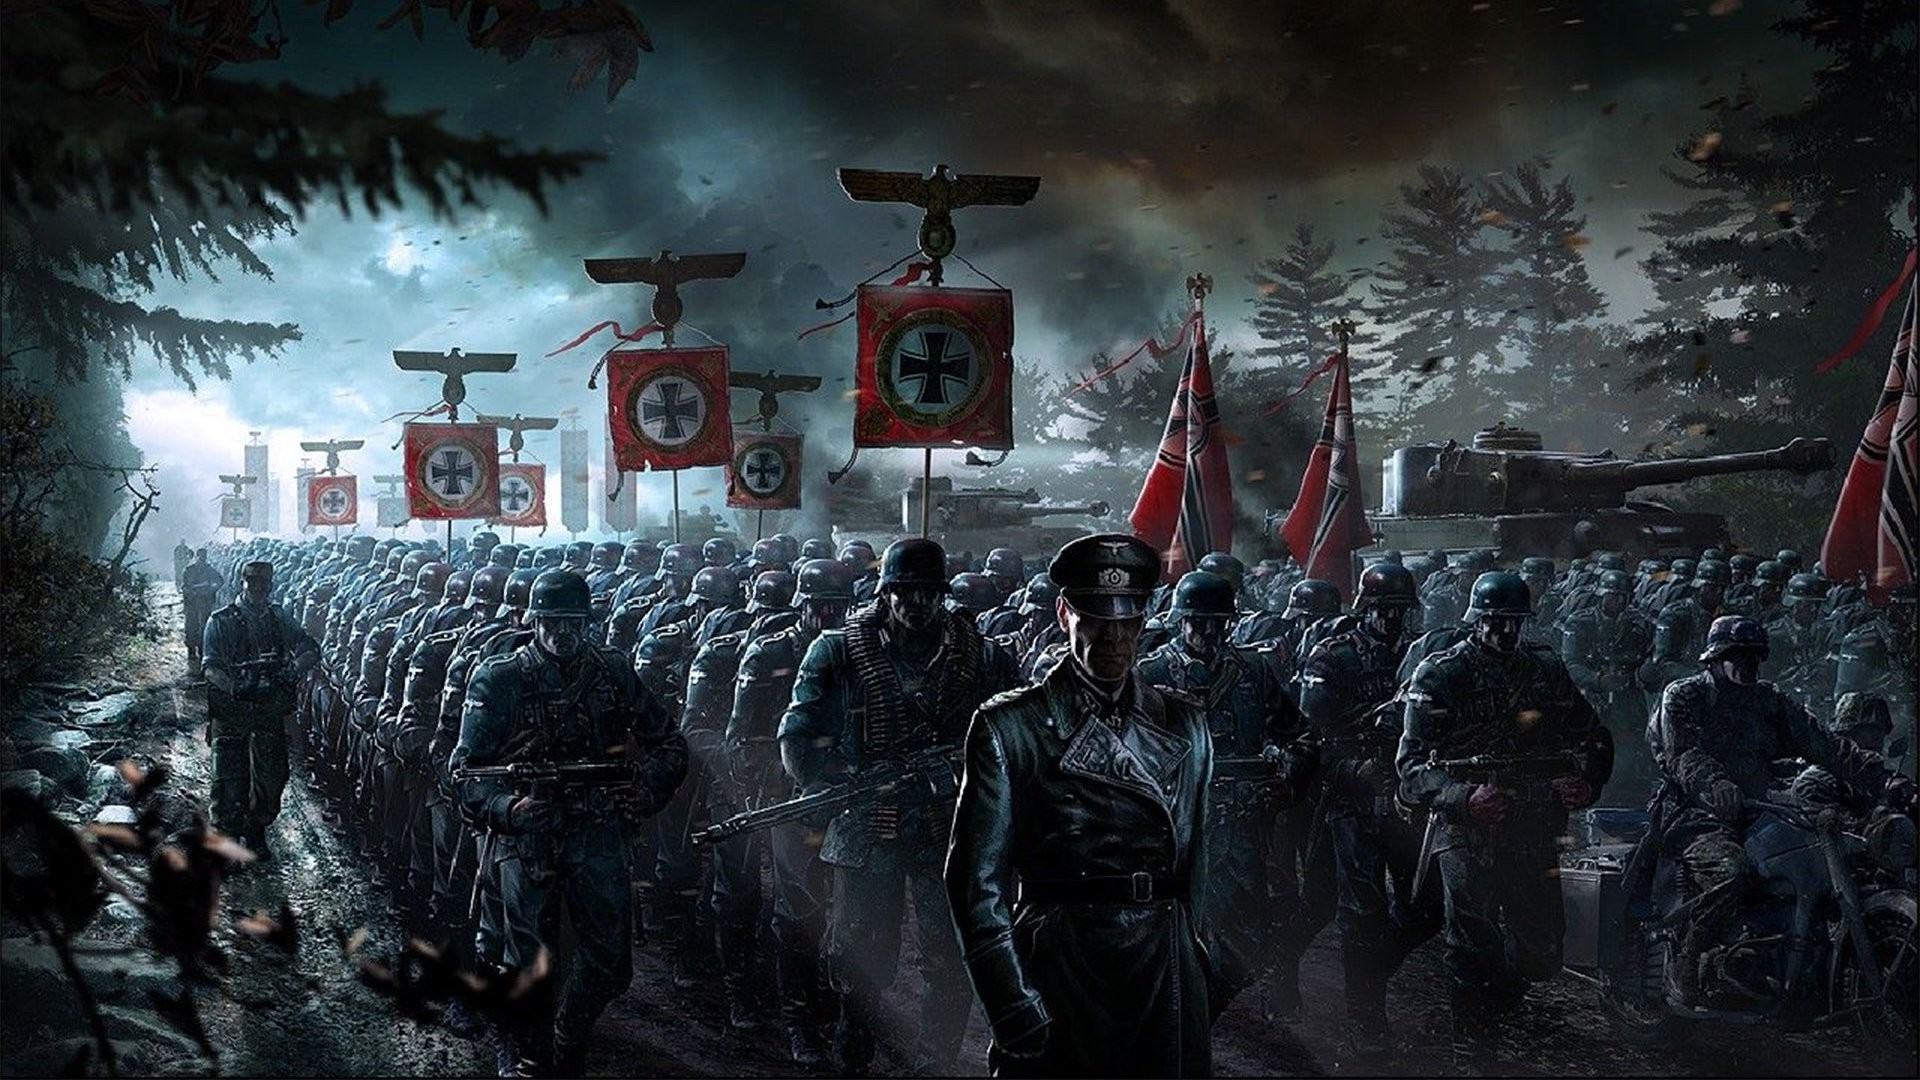 HD Nazi Wallpaper Top Pictures Mkt Quality